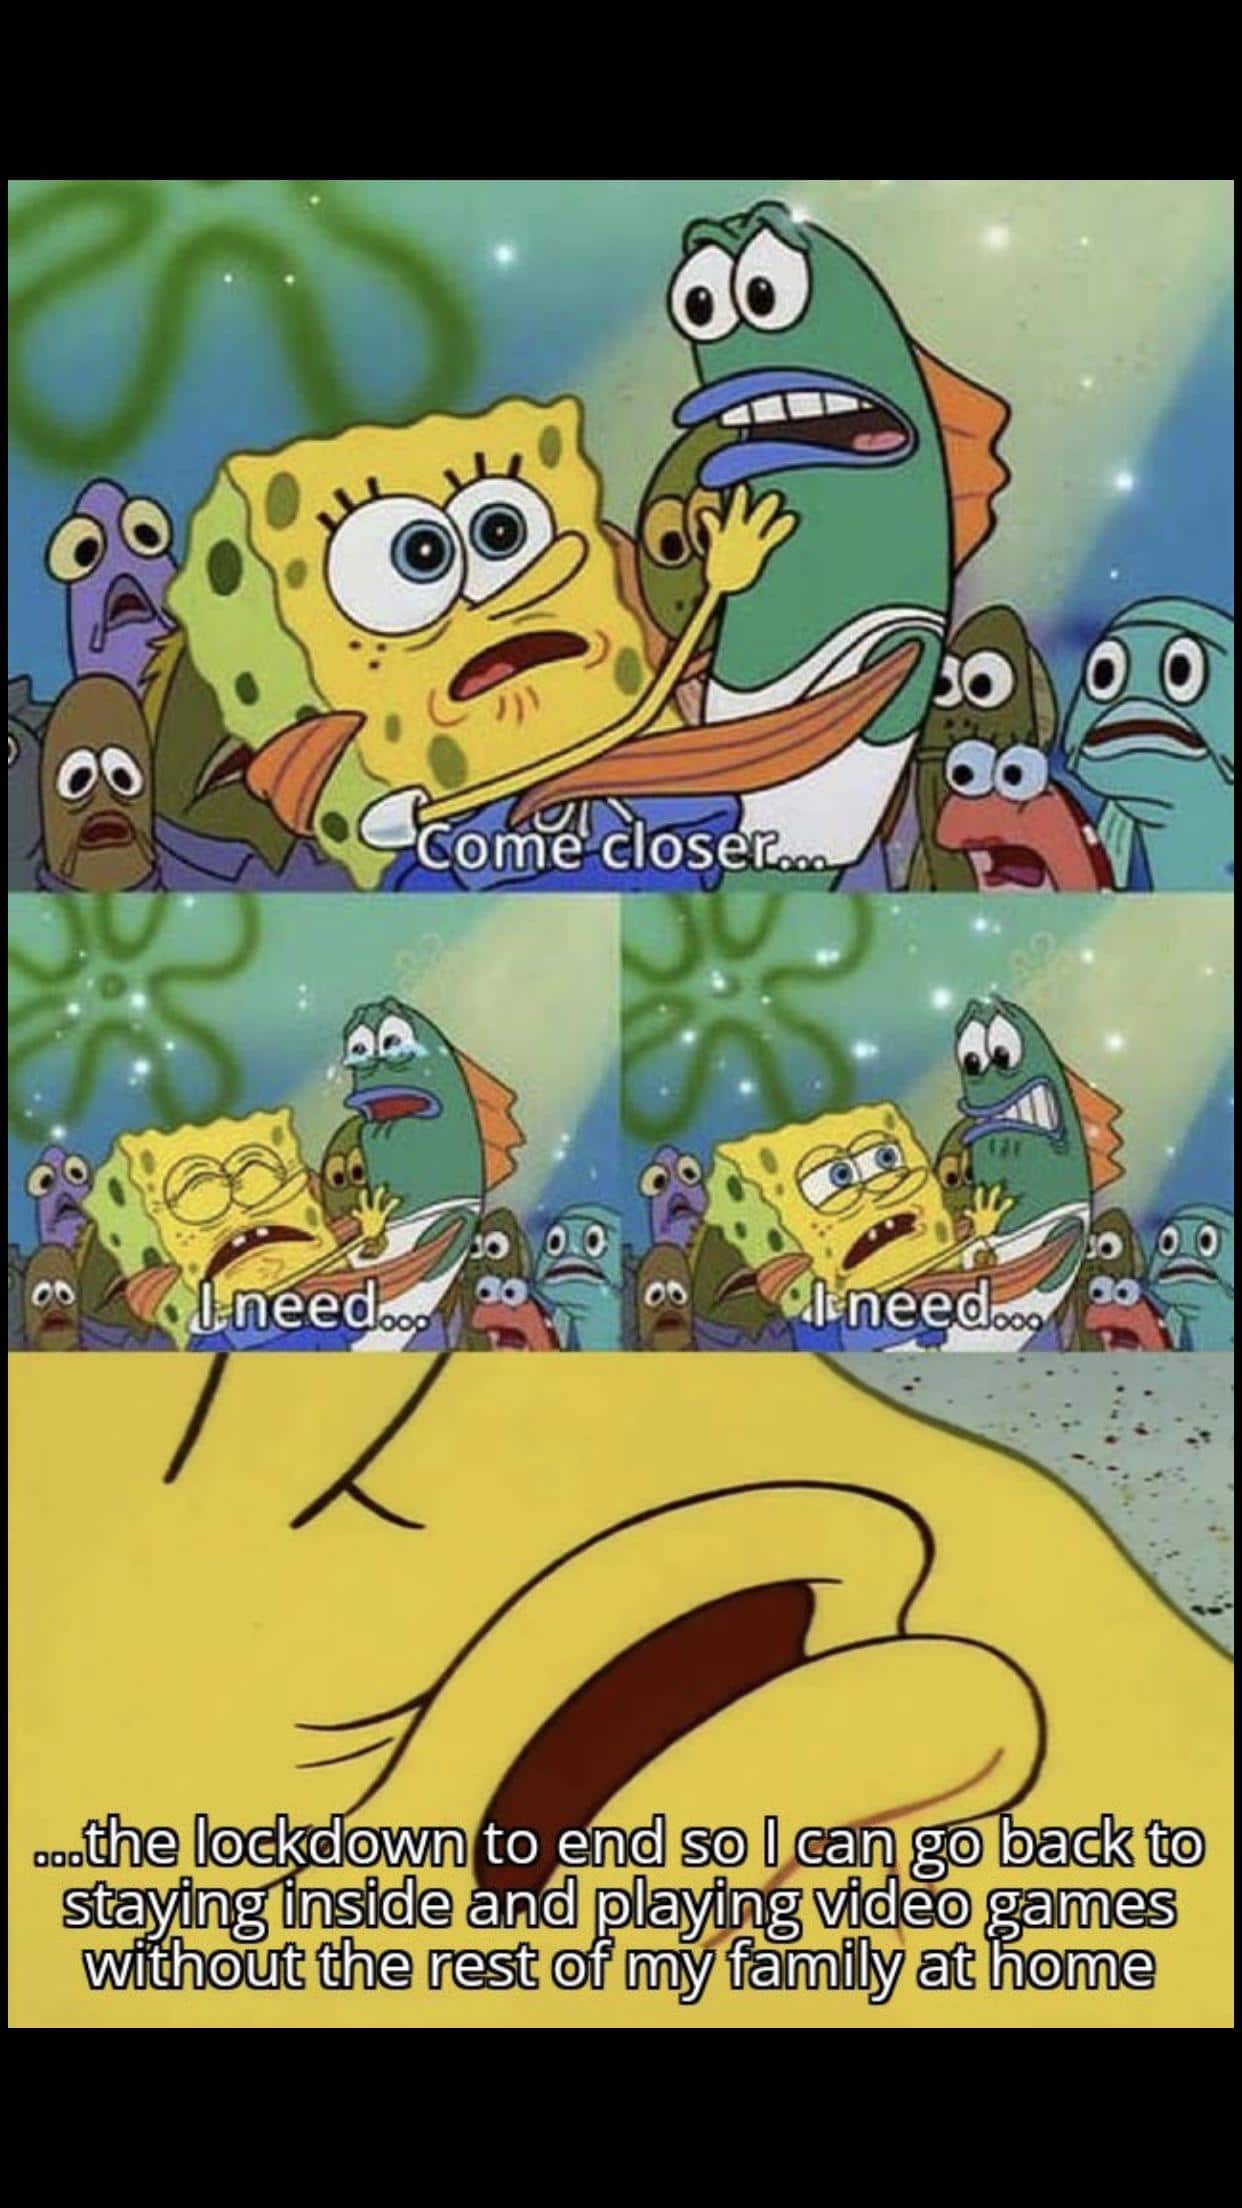 Spongebob,  Spongebob Memes Spongebob,  text: Comexloser... ...the lockdown to end so I can go back to 000 staying inside and playing video games without the rest of my family at home 